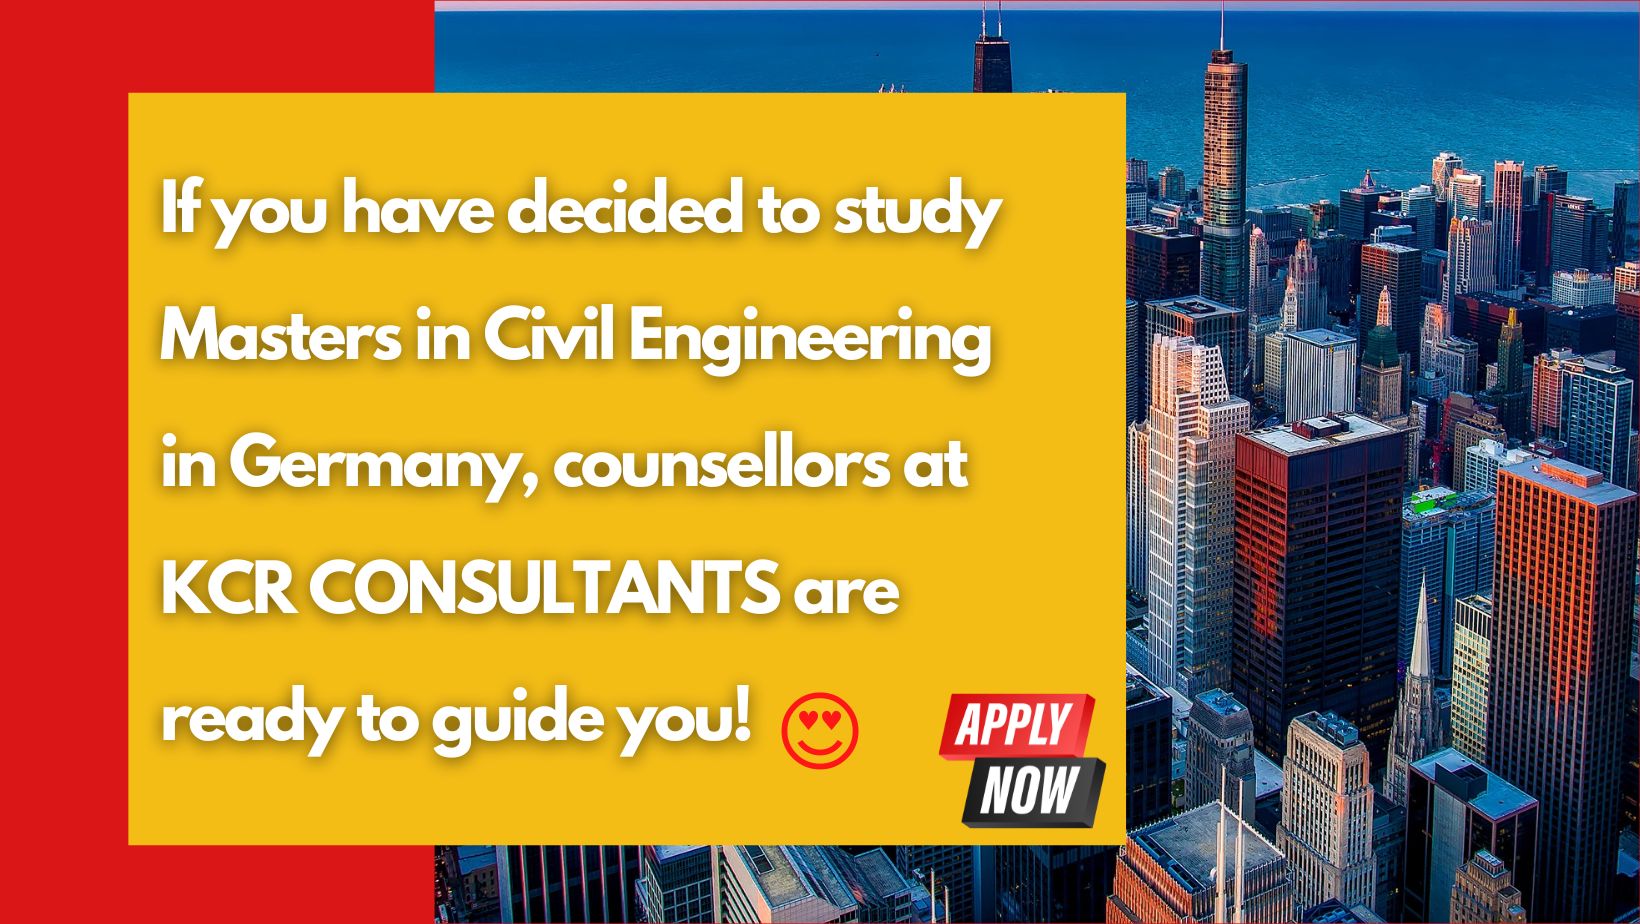 How to apply Masters in Civil Engineering in Germany